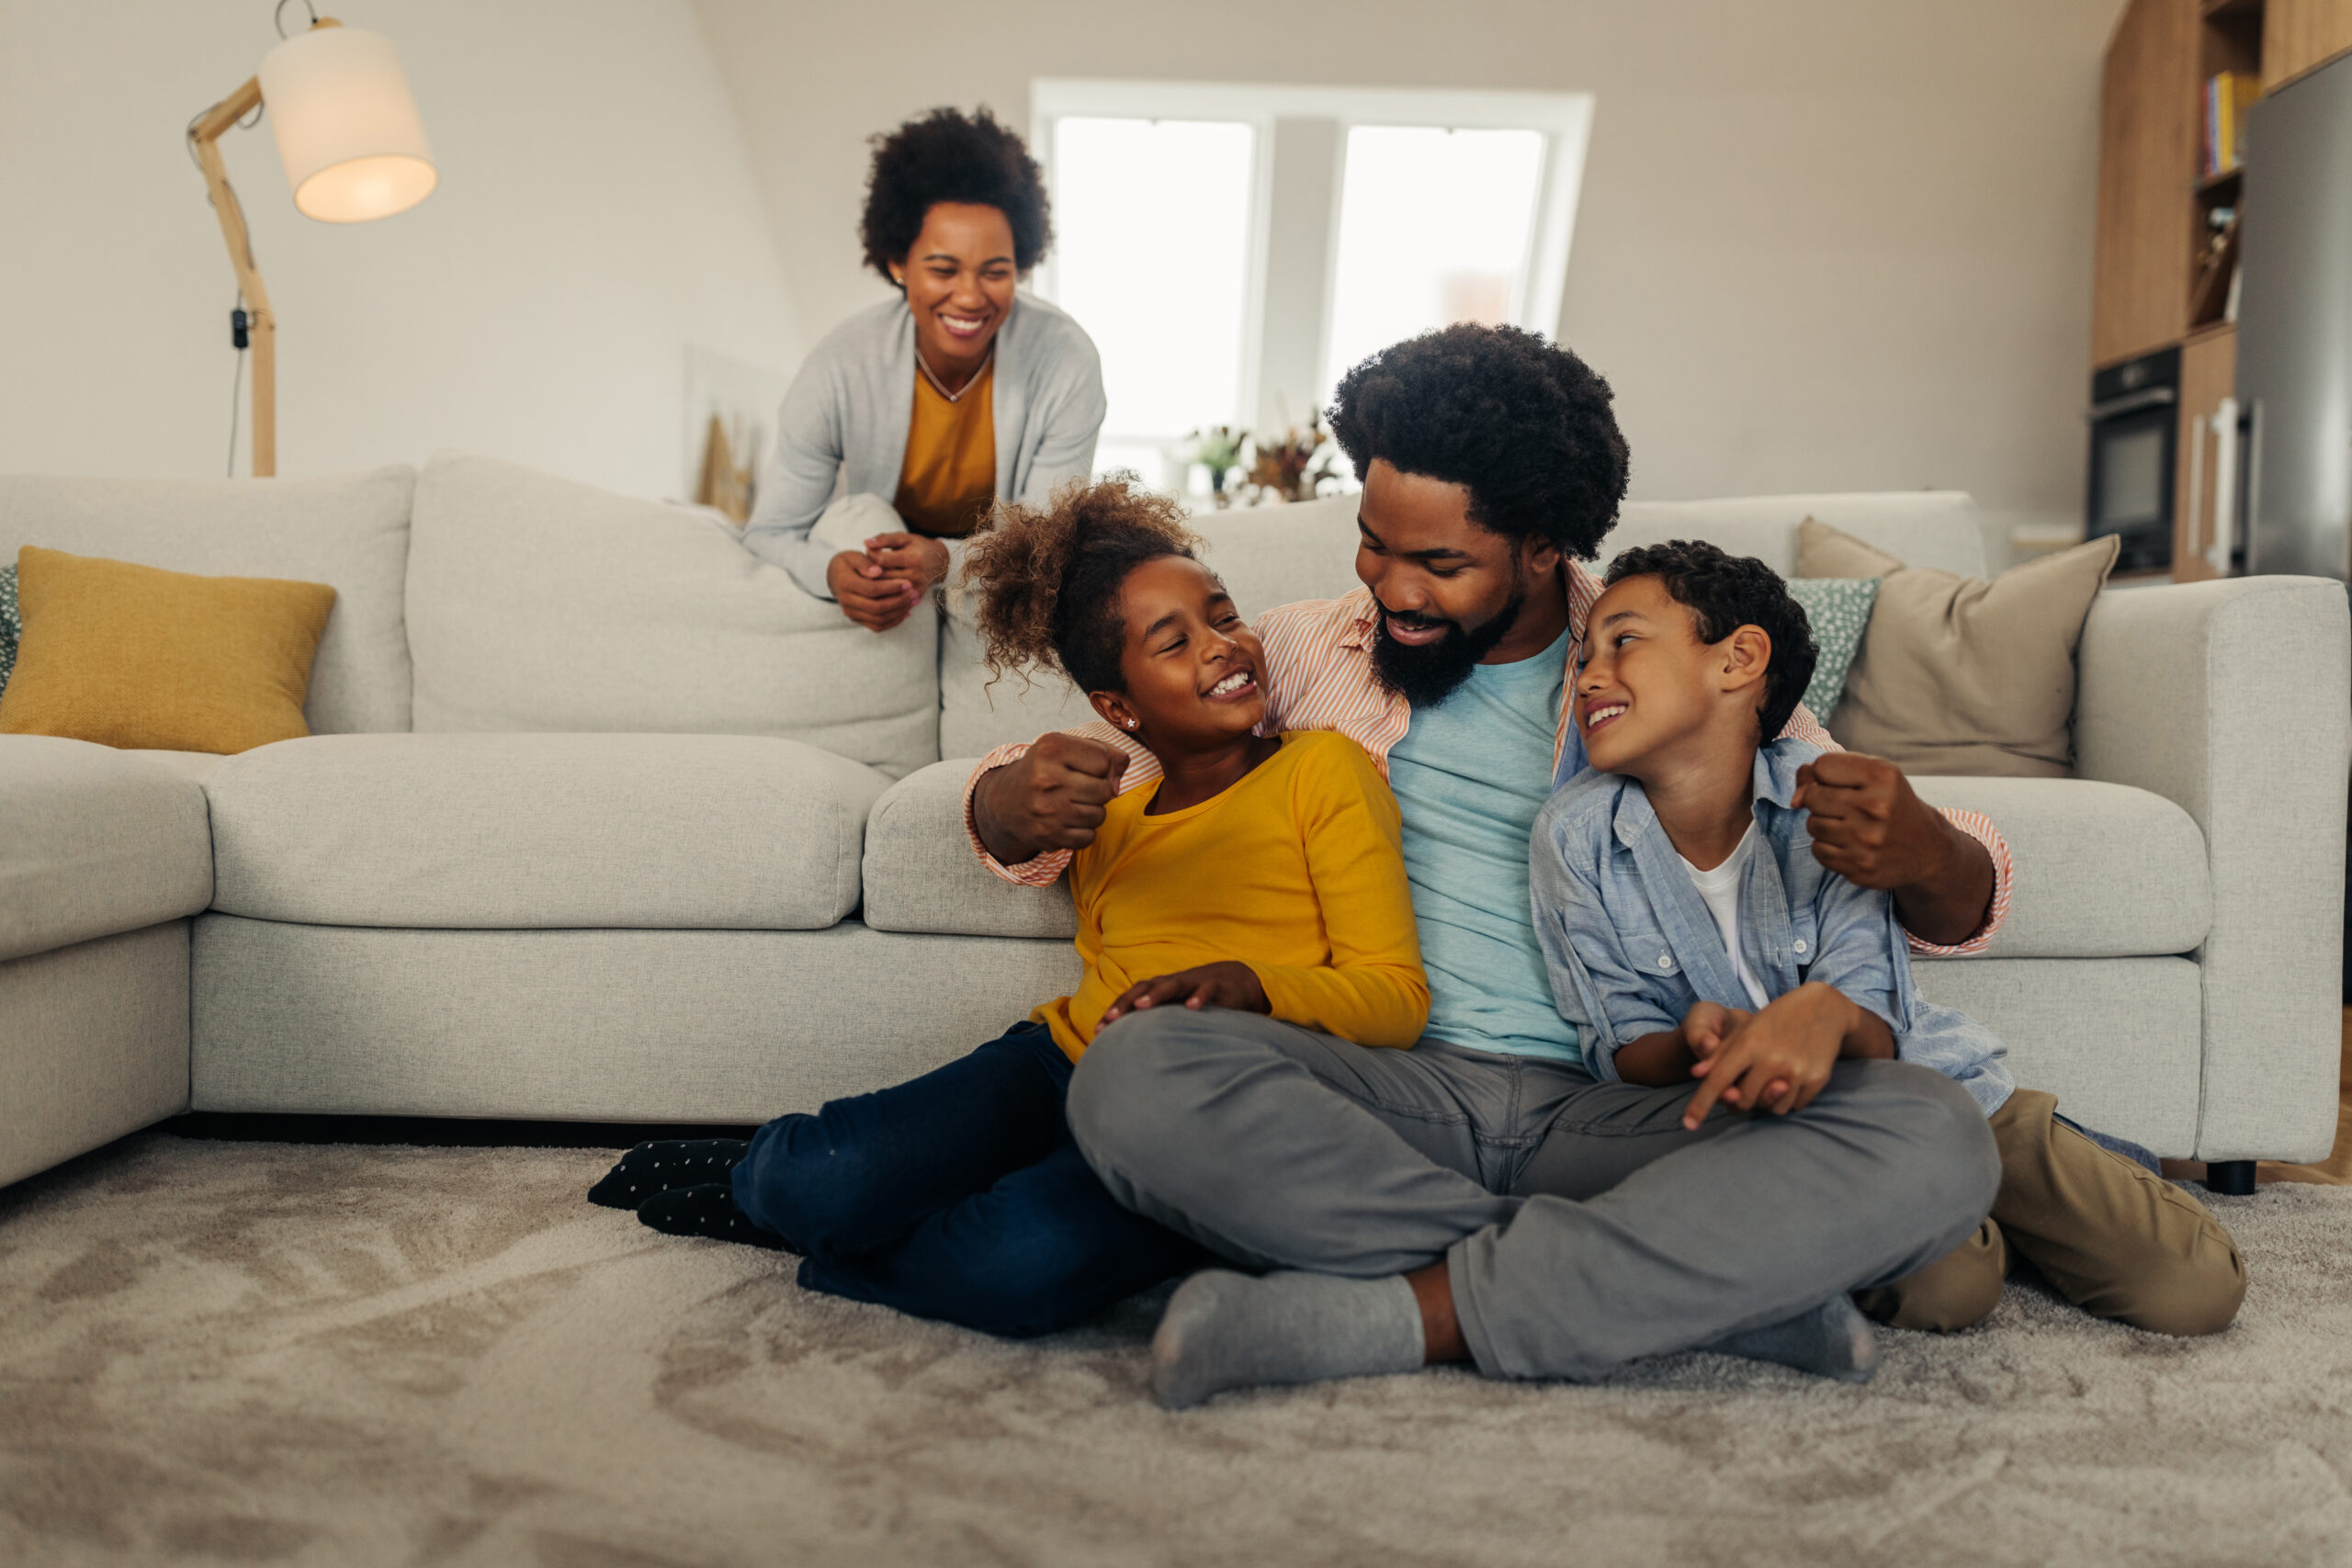 Family at home, enjoying their clean indoor air thanks to regularly changing their HVAC filters